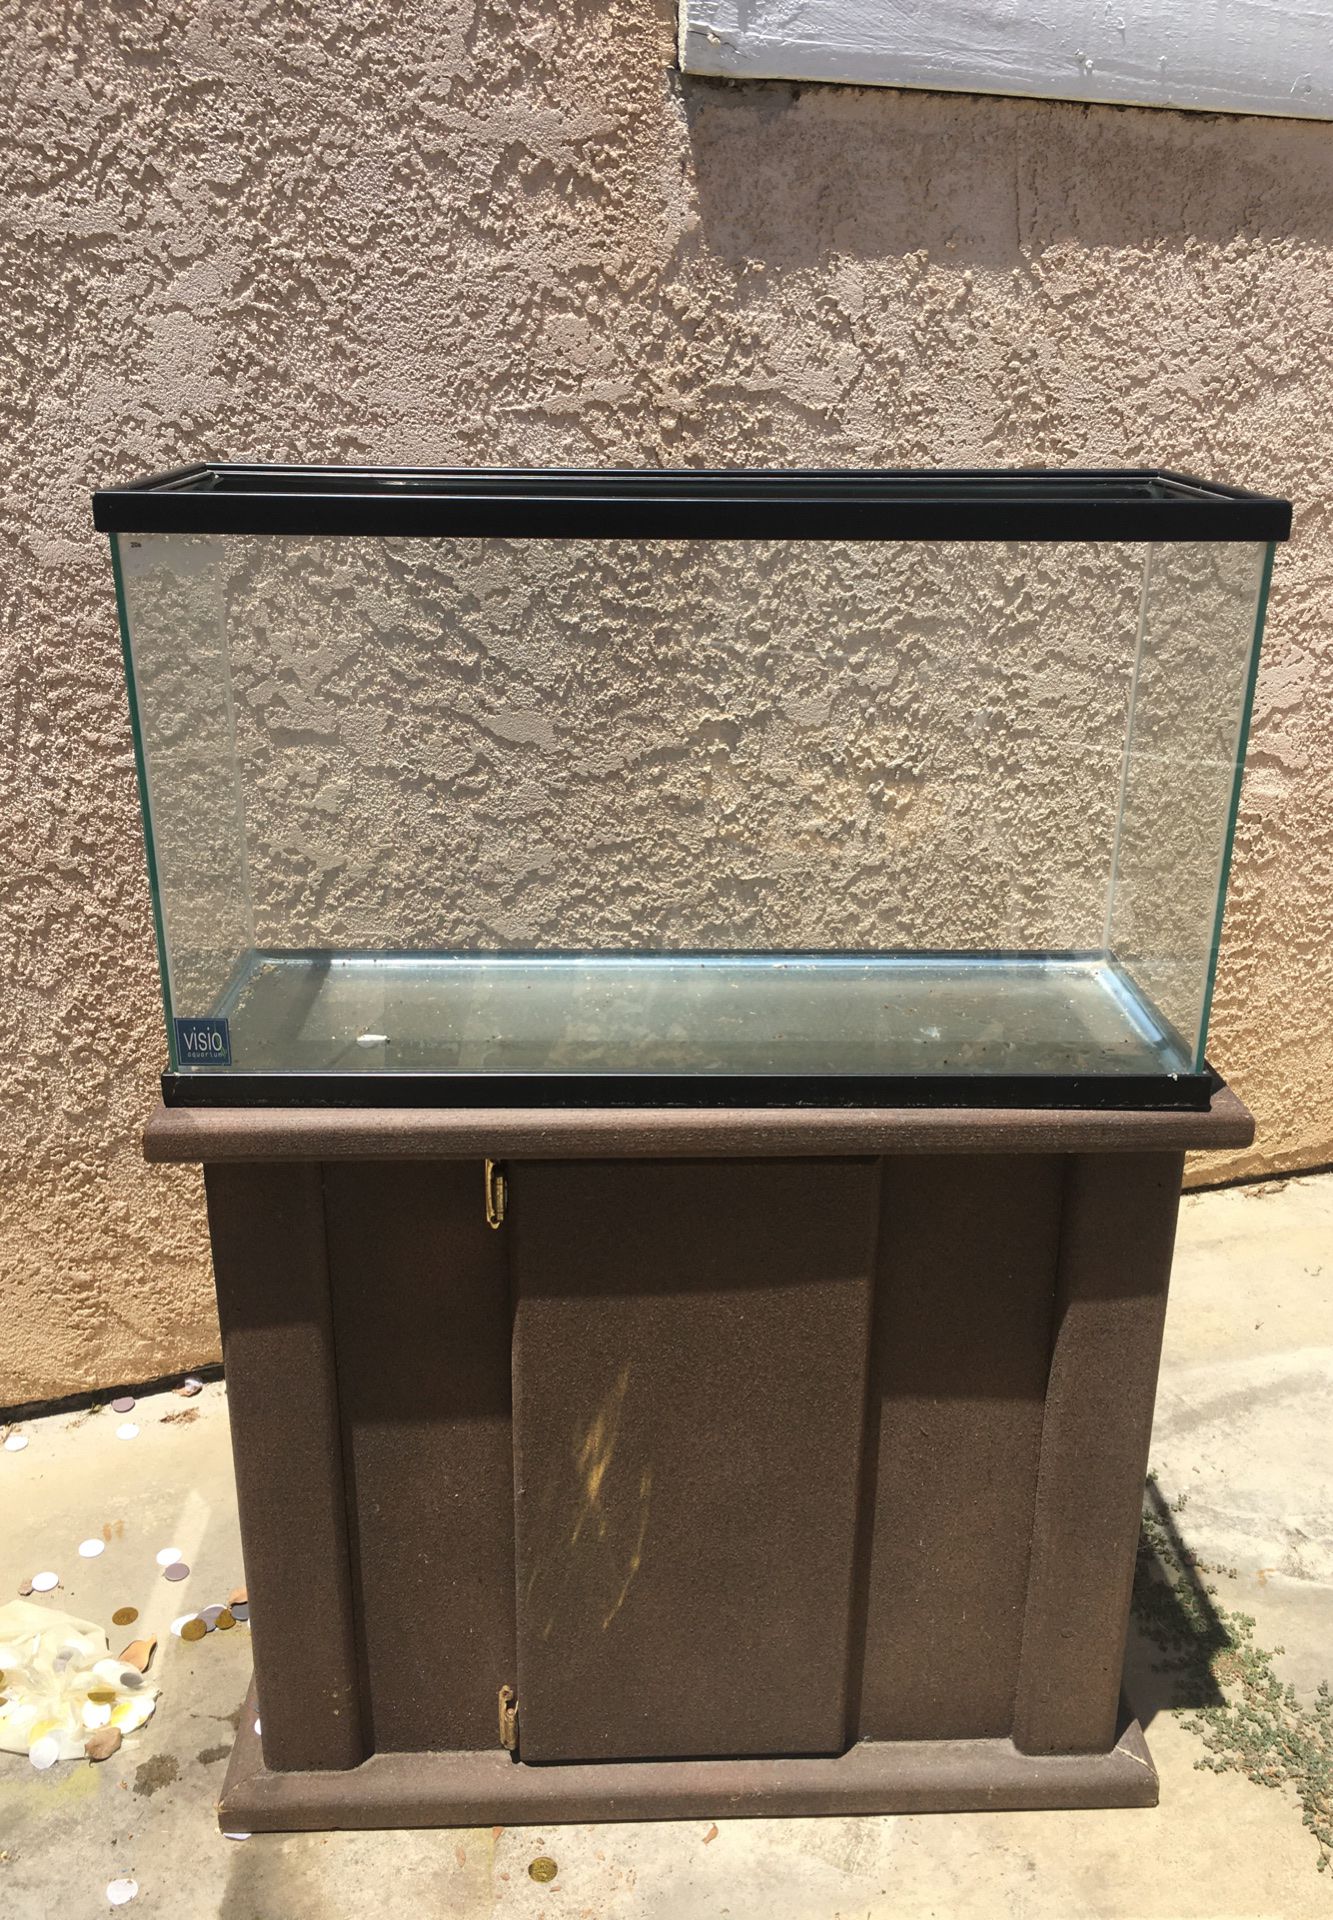 20 gallon fish tank with stand (pls buy)